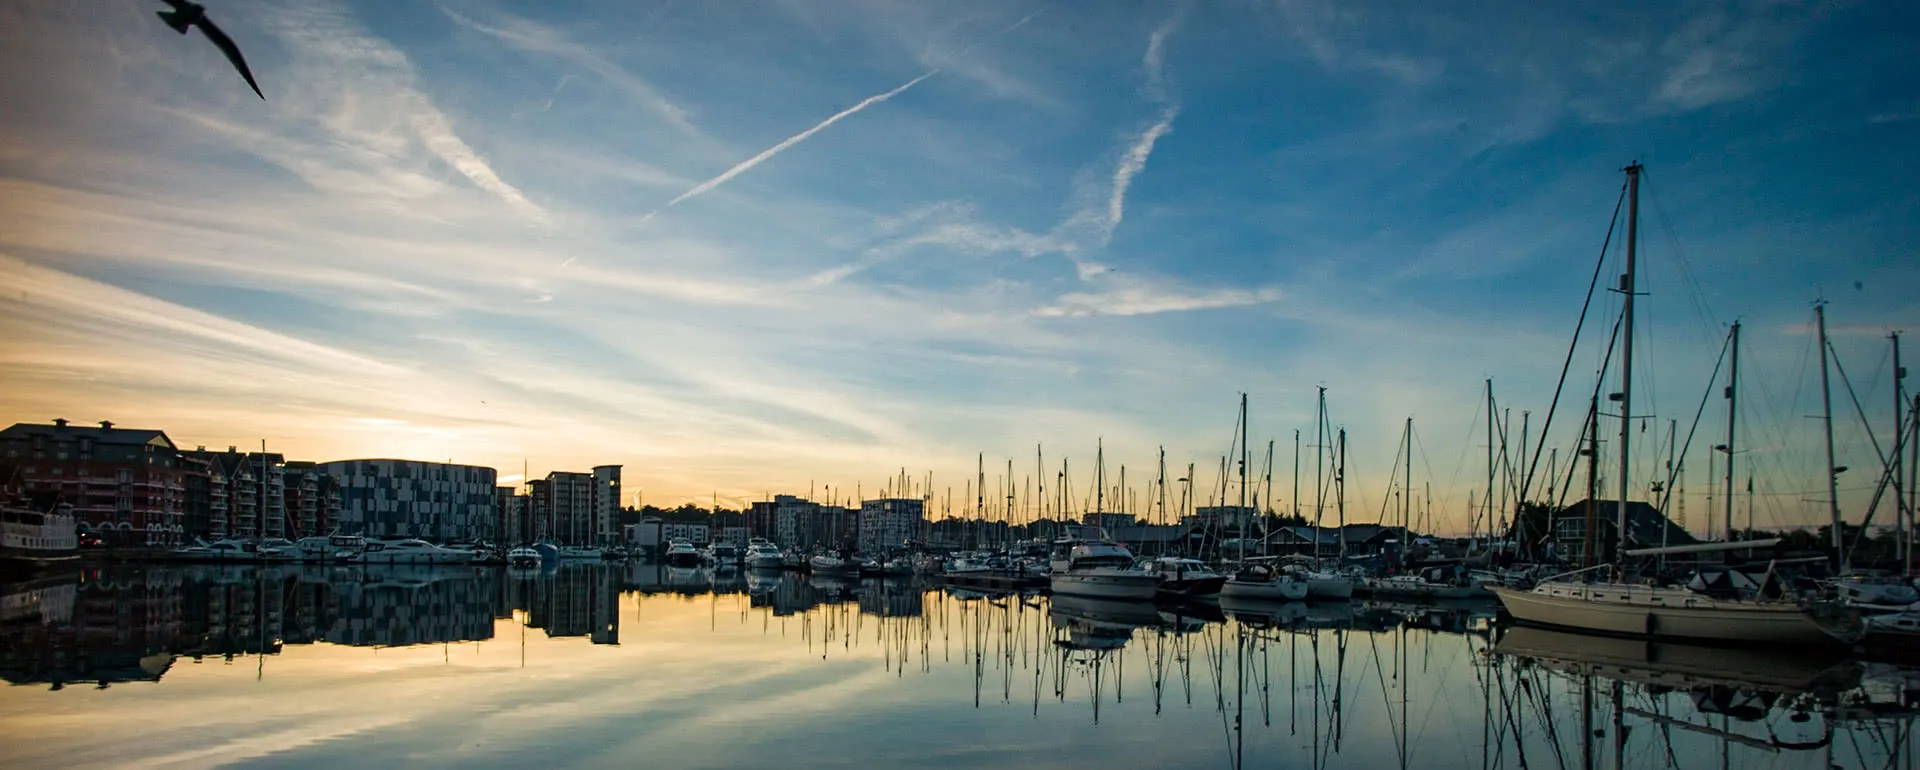 Ipswich - the destination with youth hostels